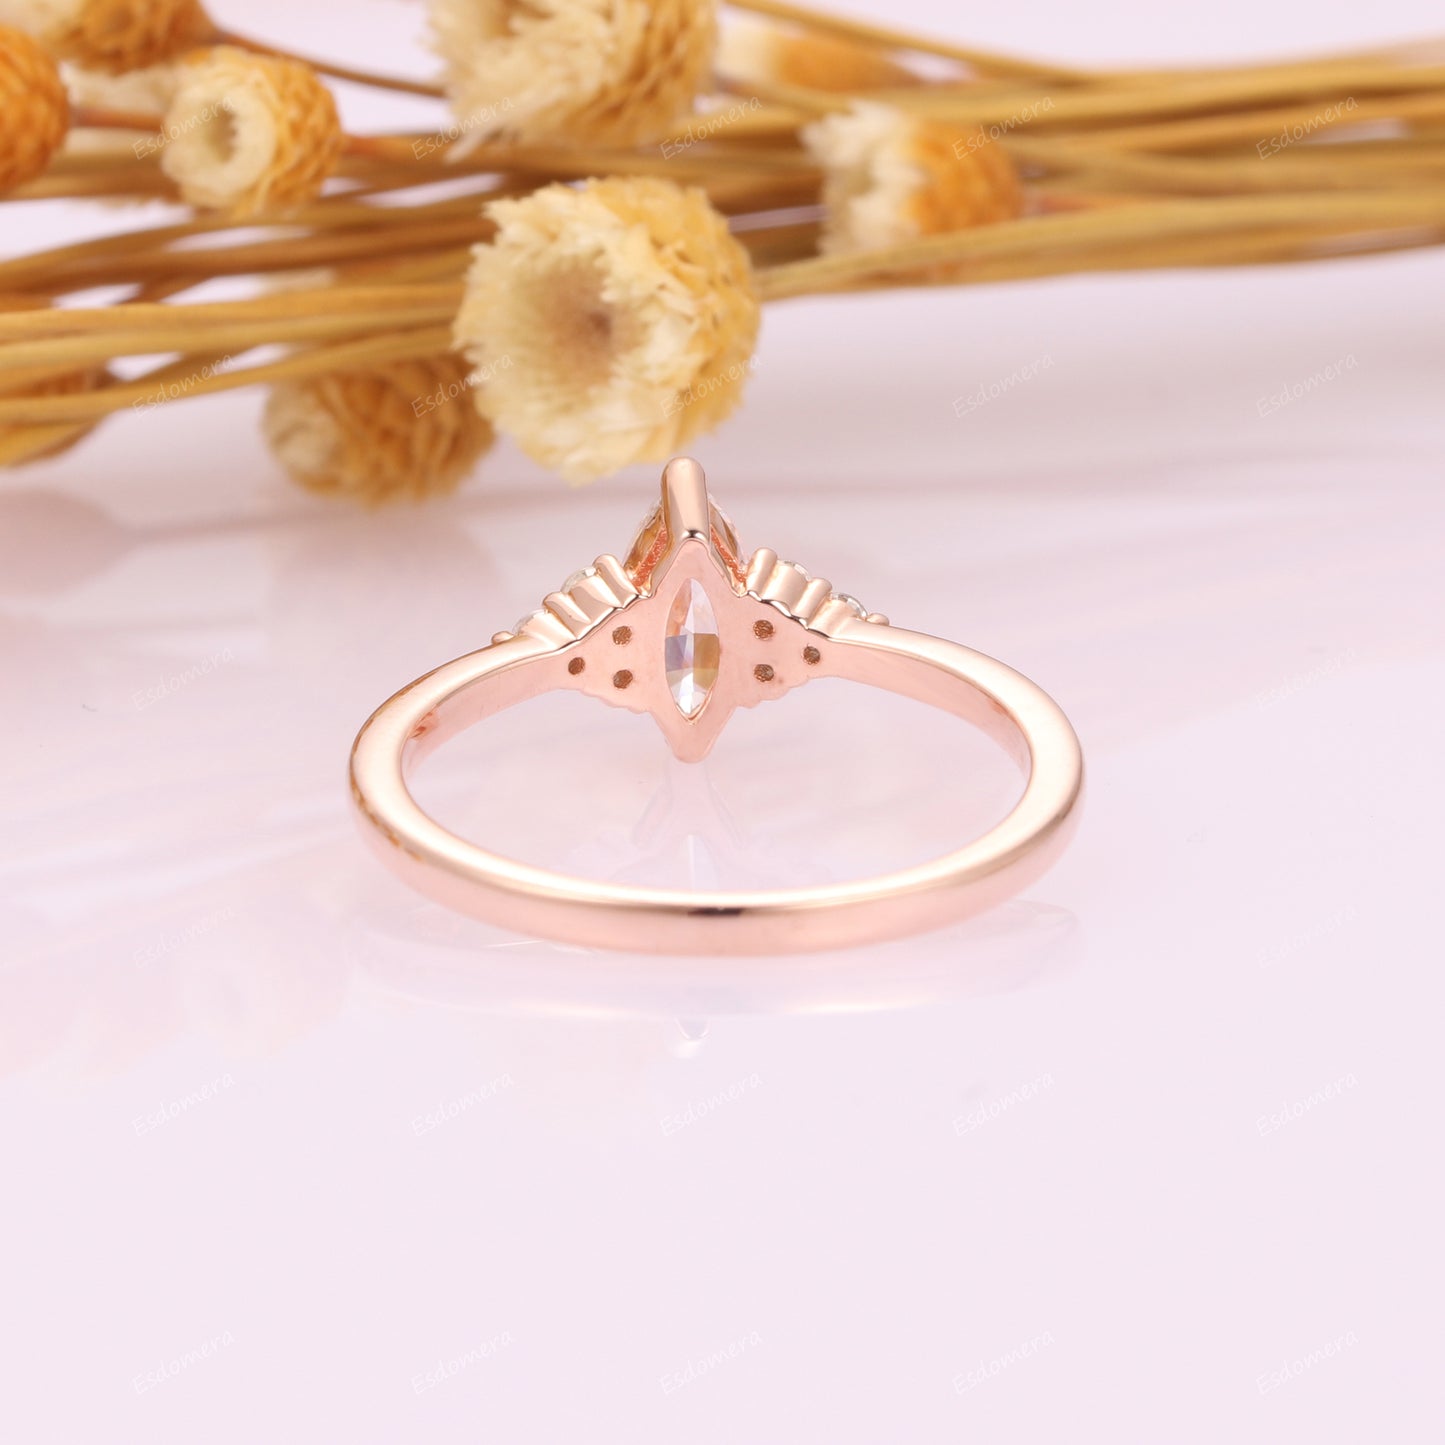 Art Deco 4x8mm Marquise Cut Moissanite Ring, Round Moissanites Cluster Engagement Ring, 14k Rose Gold Tapered Shank Bridal Ring For Her